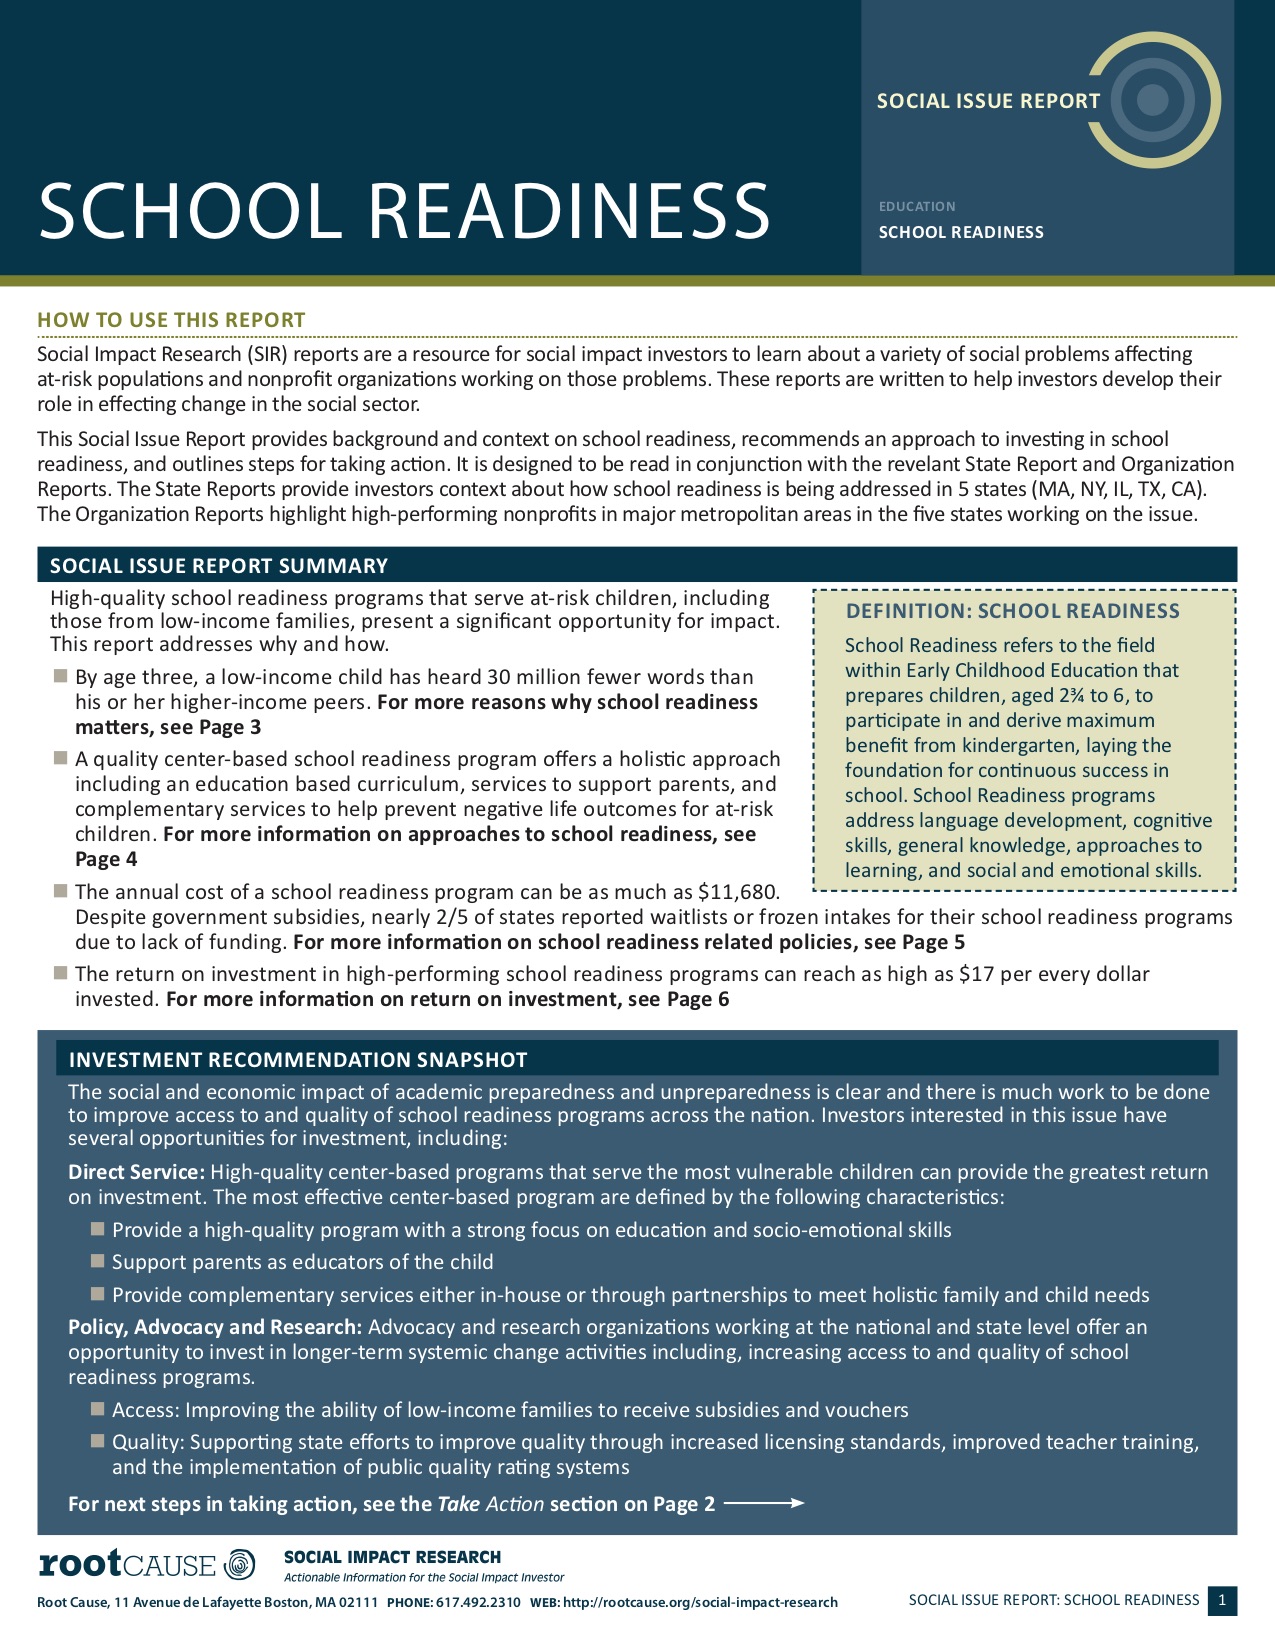 School Readiness: Social Issue Report